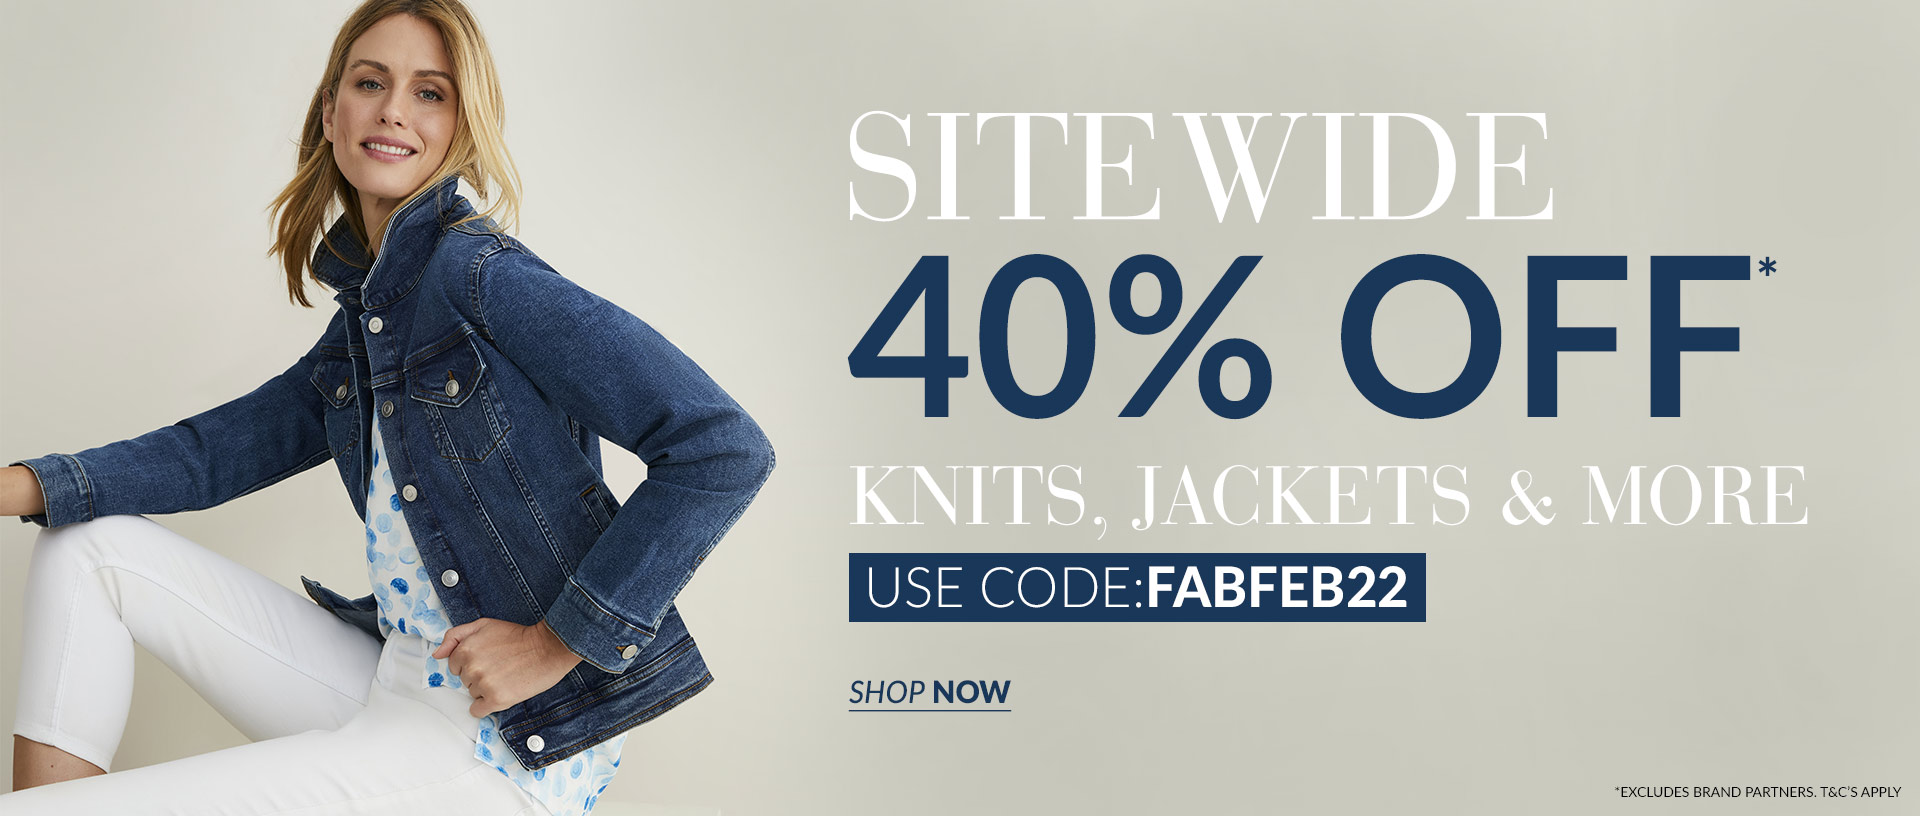 EziBuy extra 40% OFF sitewide with promo code + further 30% OFF outlet styles